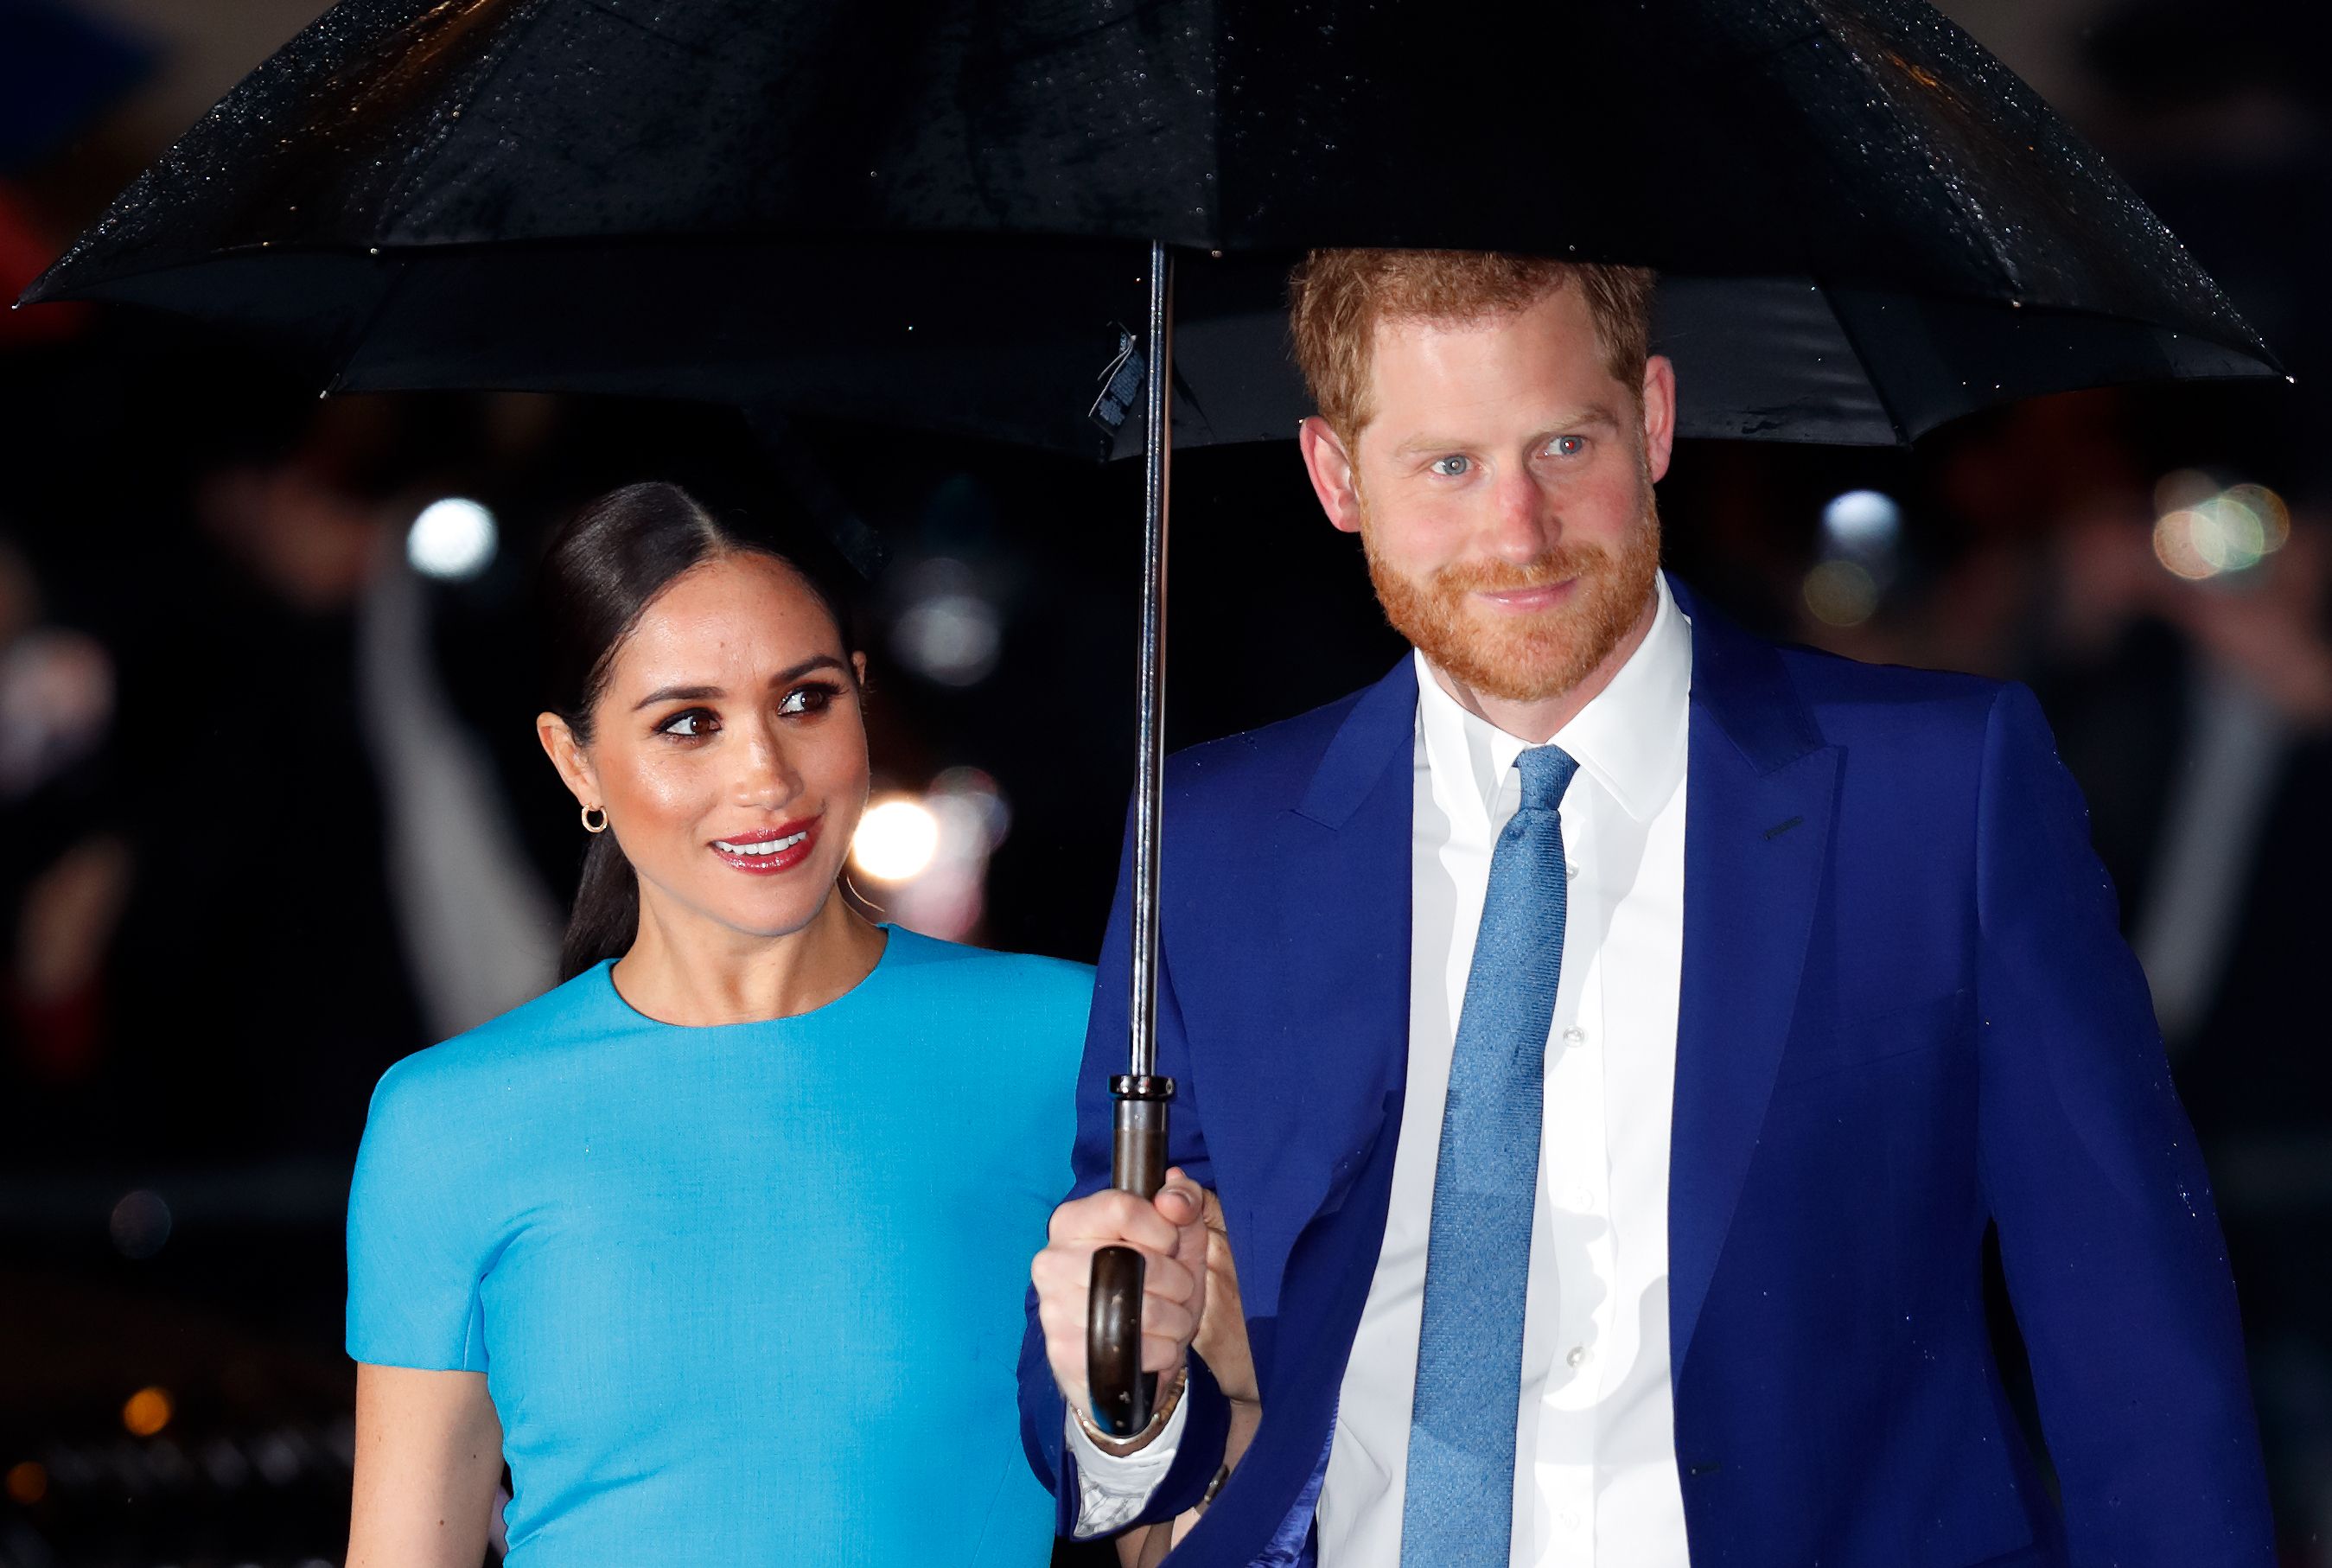 Meghan Markle Prince Harry Call Out Tabloids For Distorted Stories